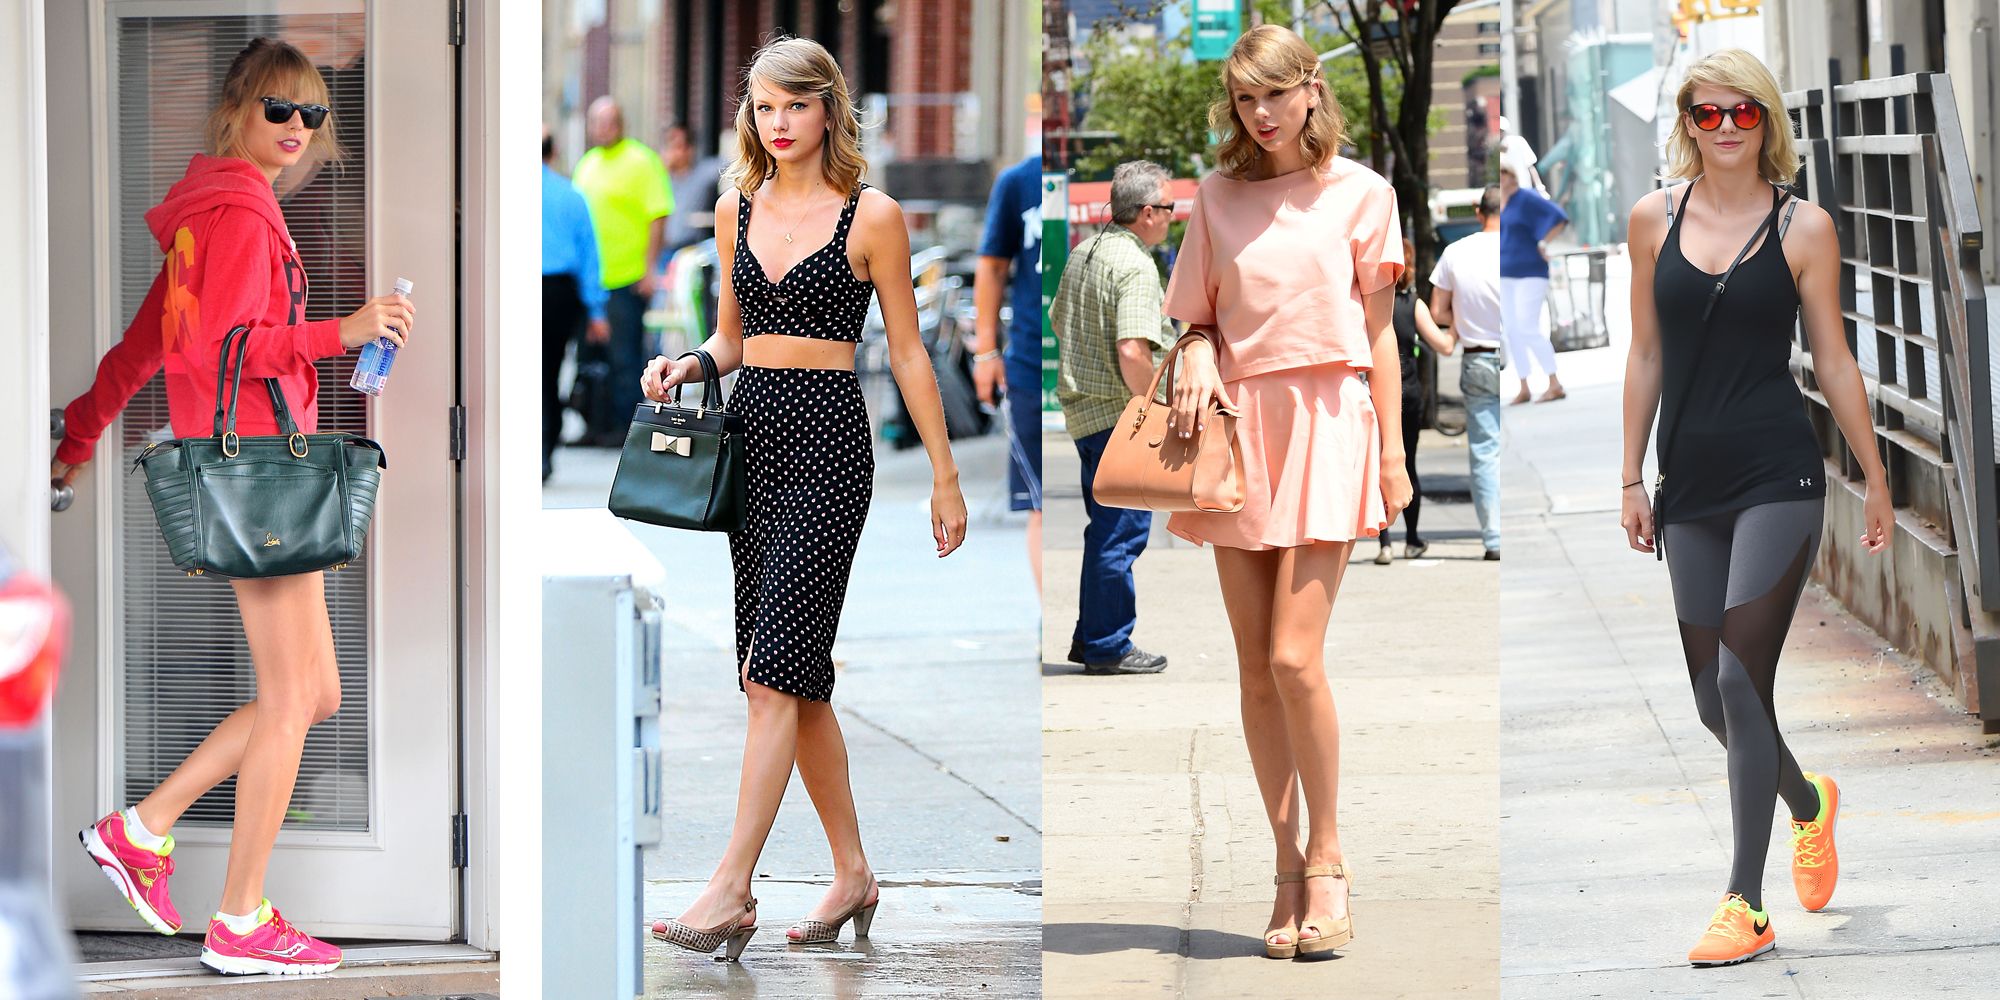 Taylor Swift just wore sheer workout leggings to the gym, and now